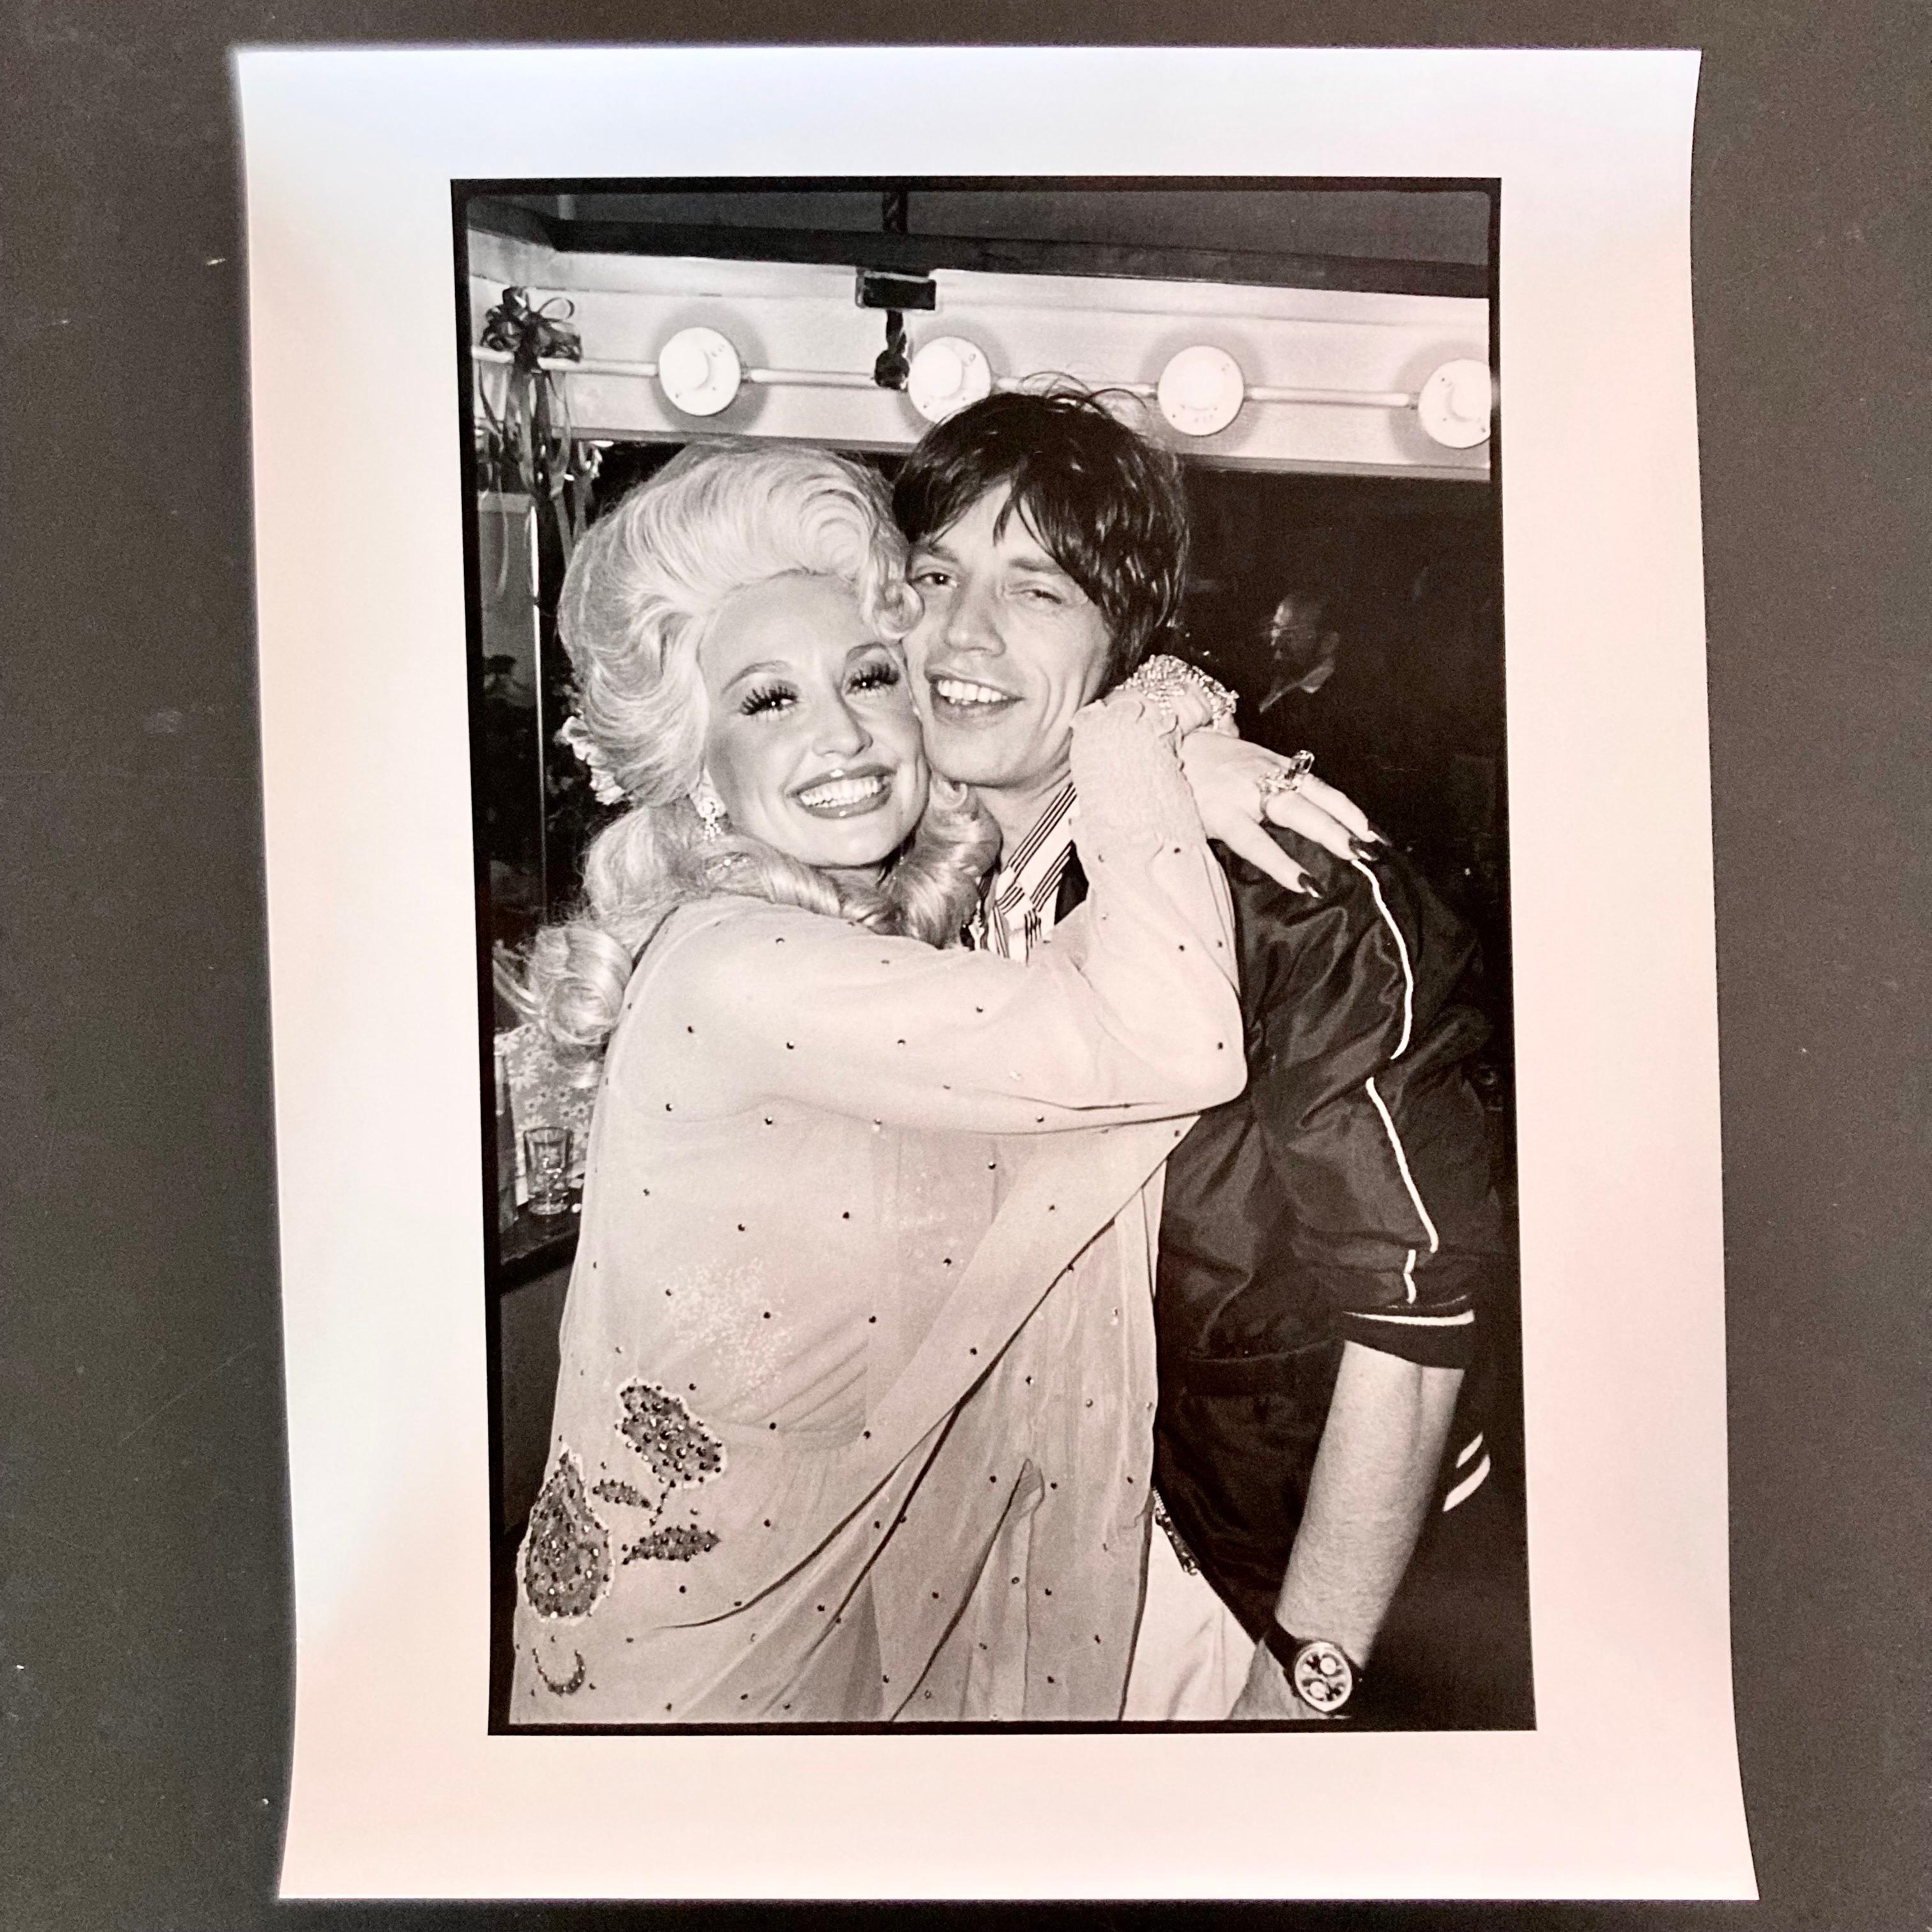 Vintage darkroom print of Dolly Parton hugging Rolling Stones Mick Jagger, taken at The Bottom Line in New York City after a Dolly Parton show in 1977. This print is an original, hand printed darkroom print made by the photographer Allan Tannenbaum.